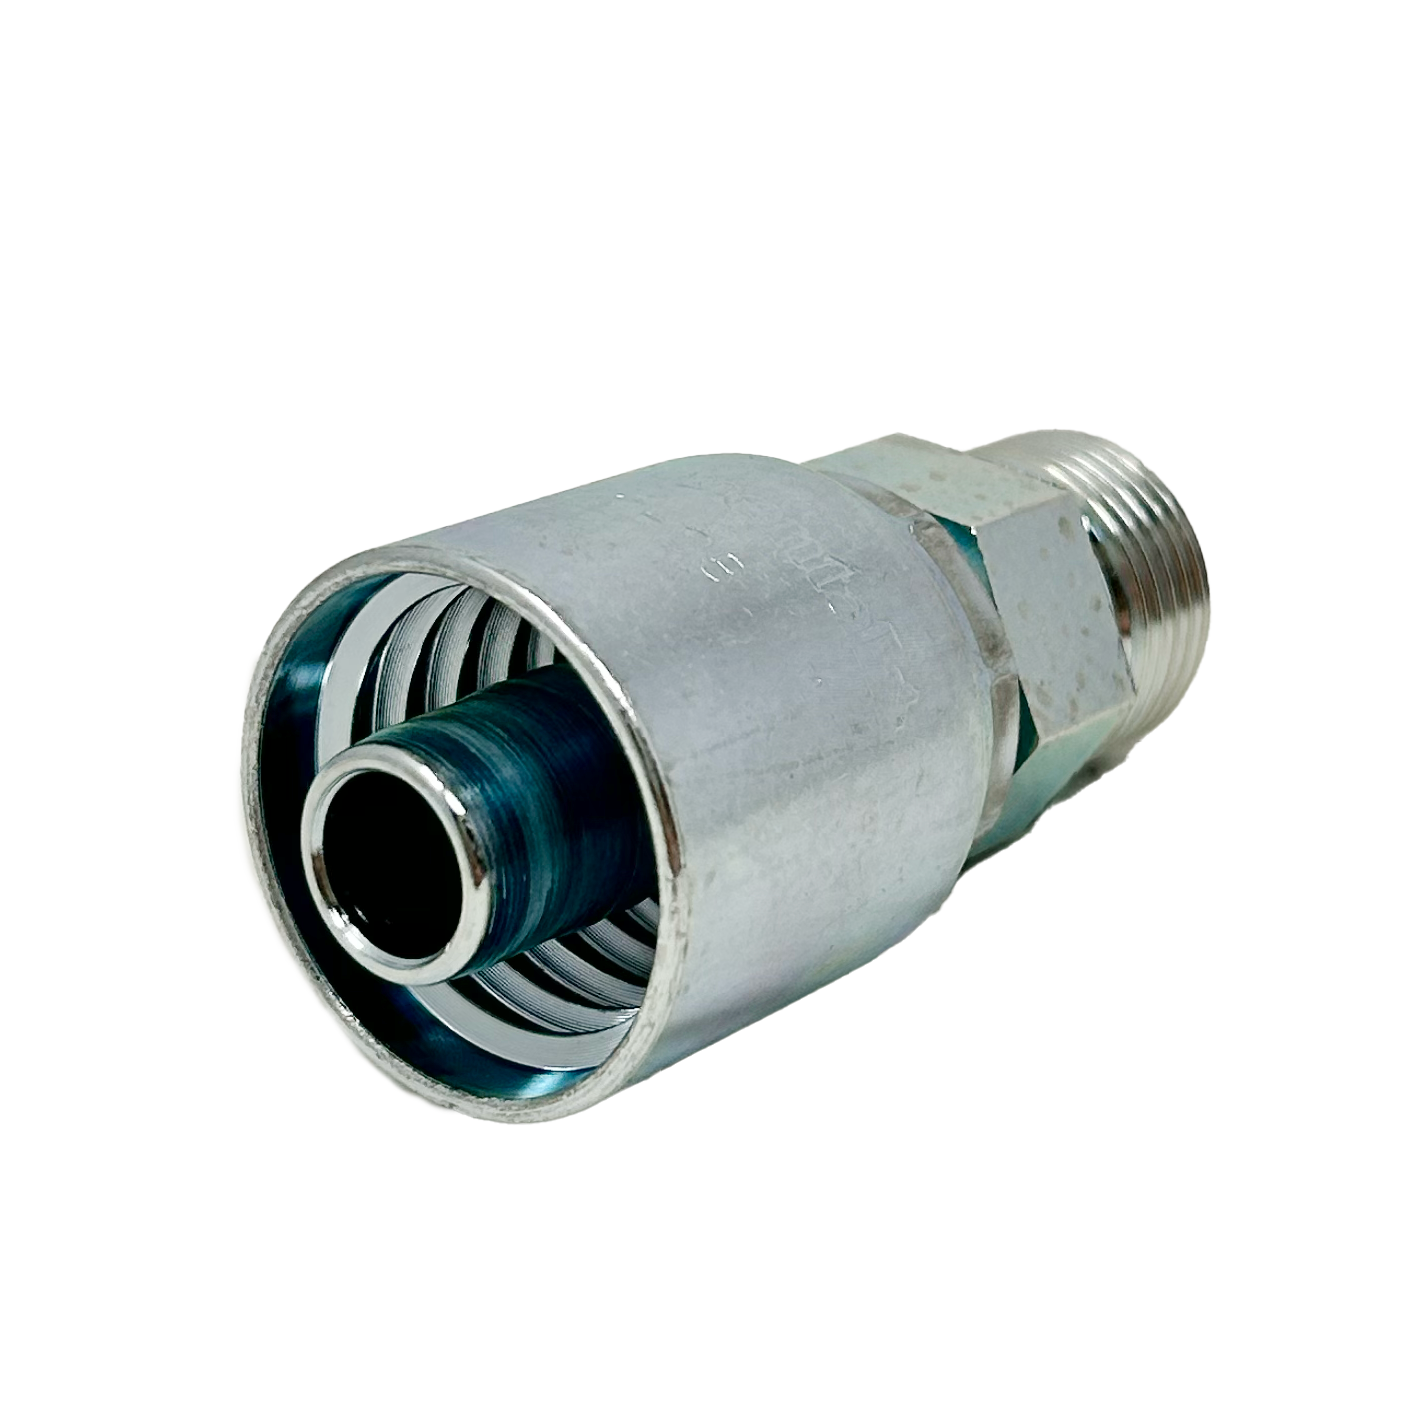 B2-OFM-0808: Continental Hose Fitting, 0.5 (1/2") Hose ID x 13/16-16 Male ORFS, Straight Rigid Connection